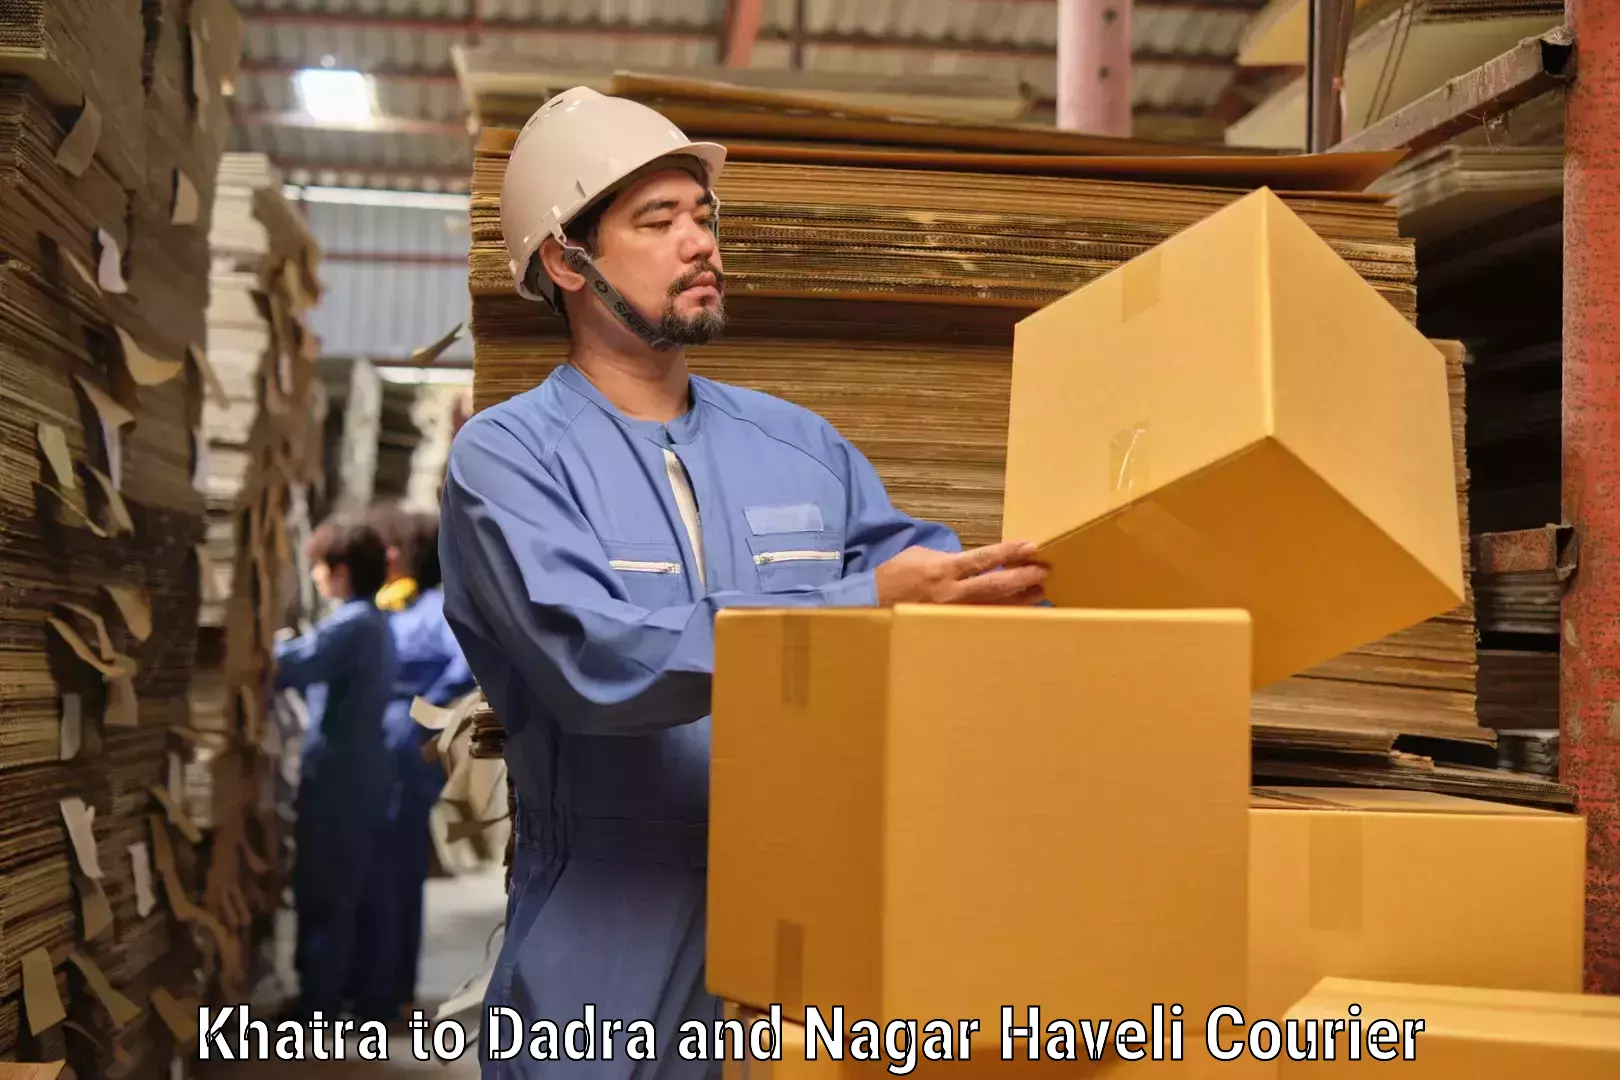 Efficient package consolidation Khatra to Dadra and Nagar Haveli